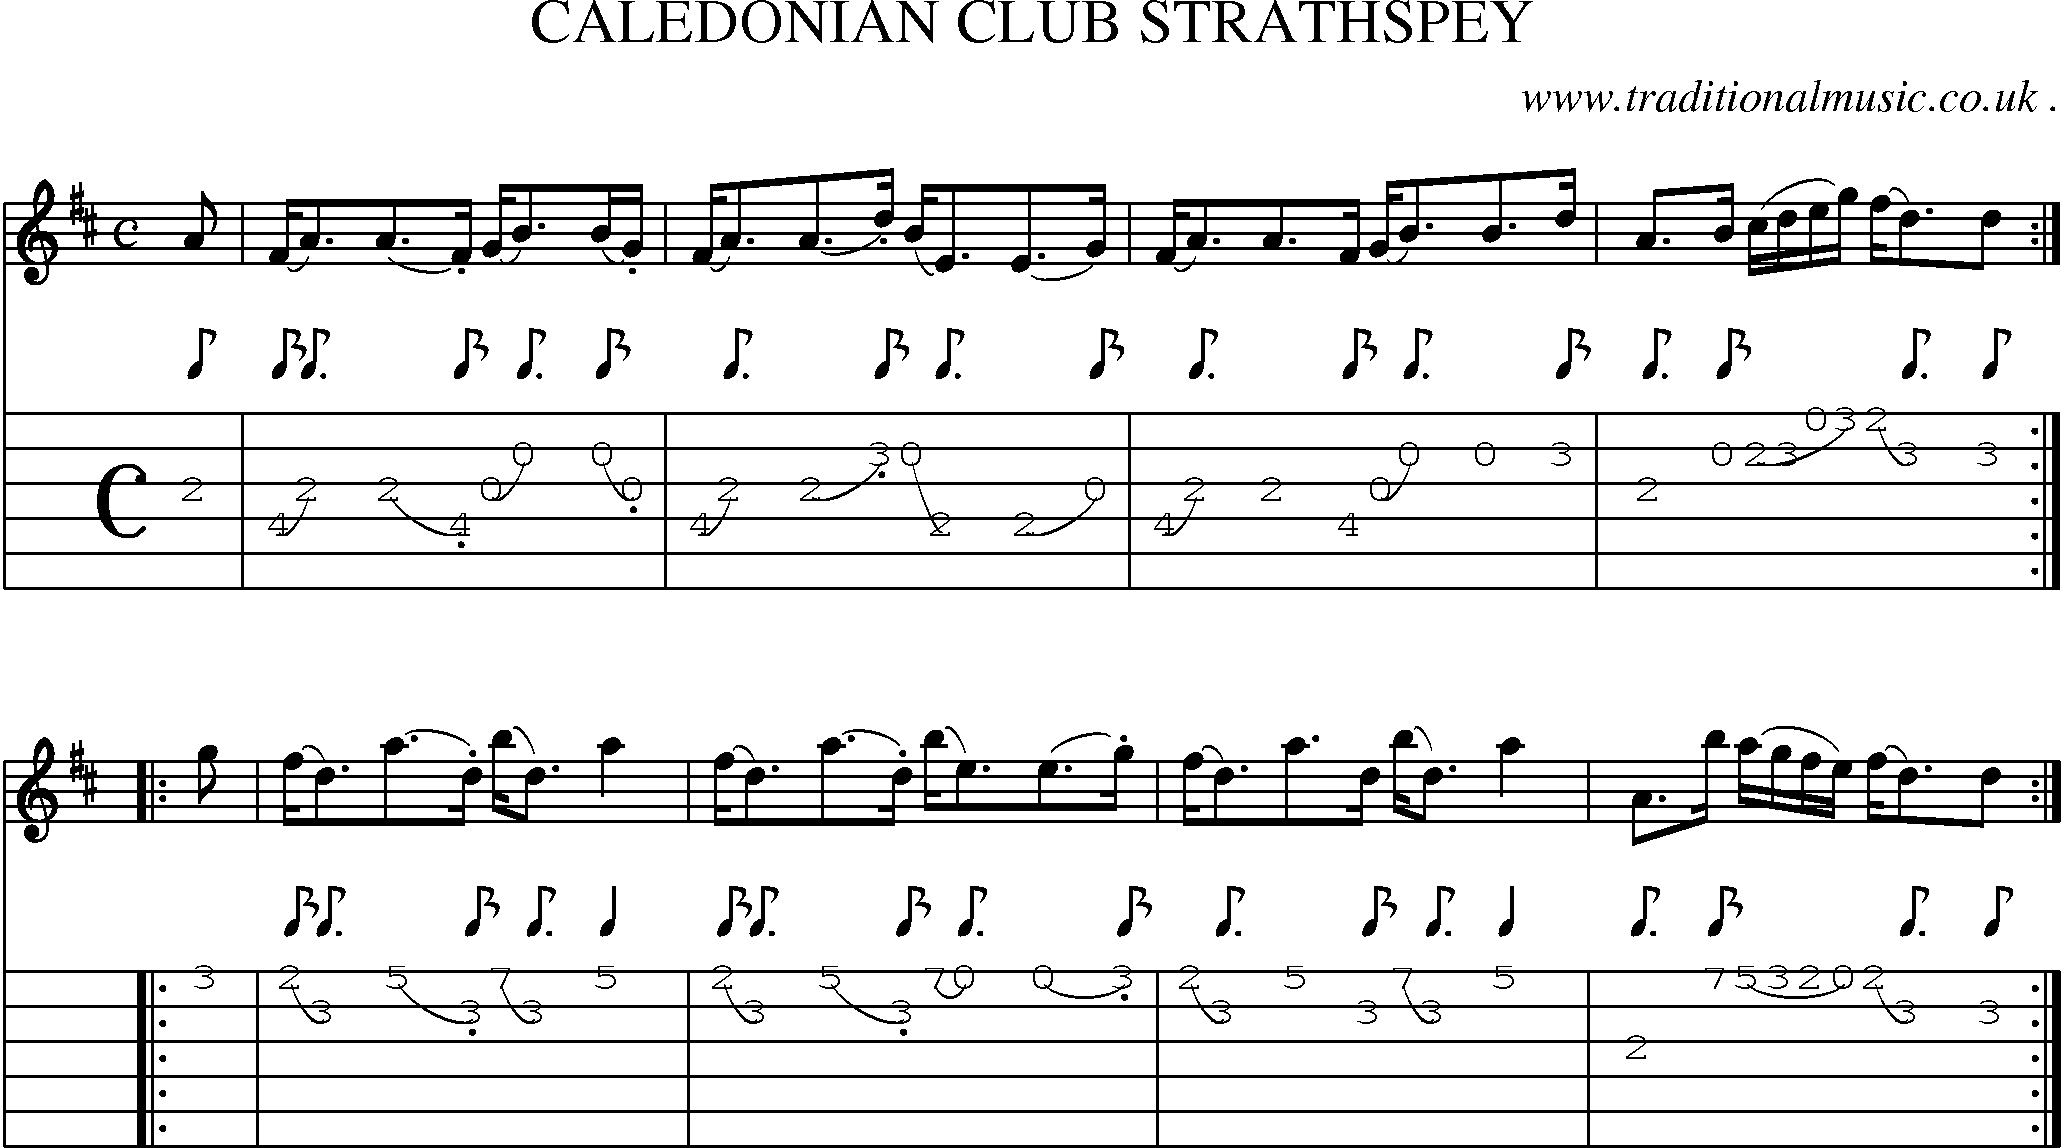 Sheet-Music and Guitar Tabs for Caledonian Club Strathspey